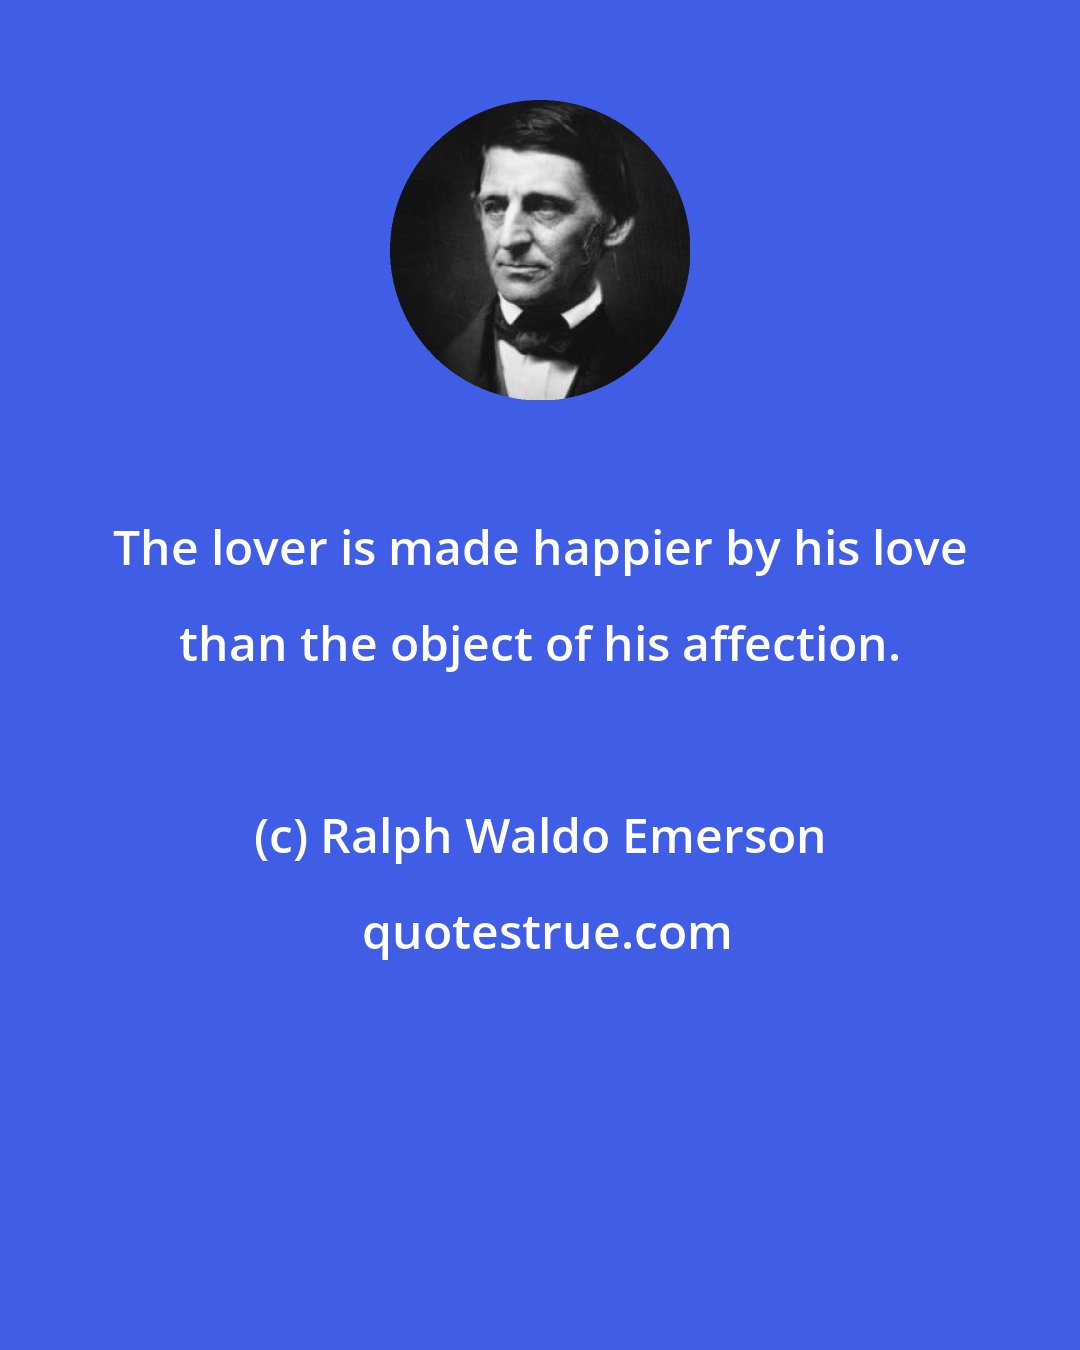 Ralph Waldo Emerson: The lover is made happier by his love than the object of his affection.